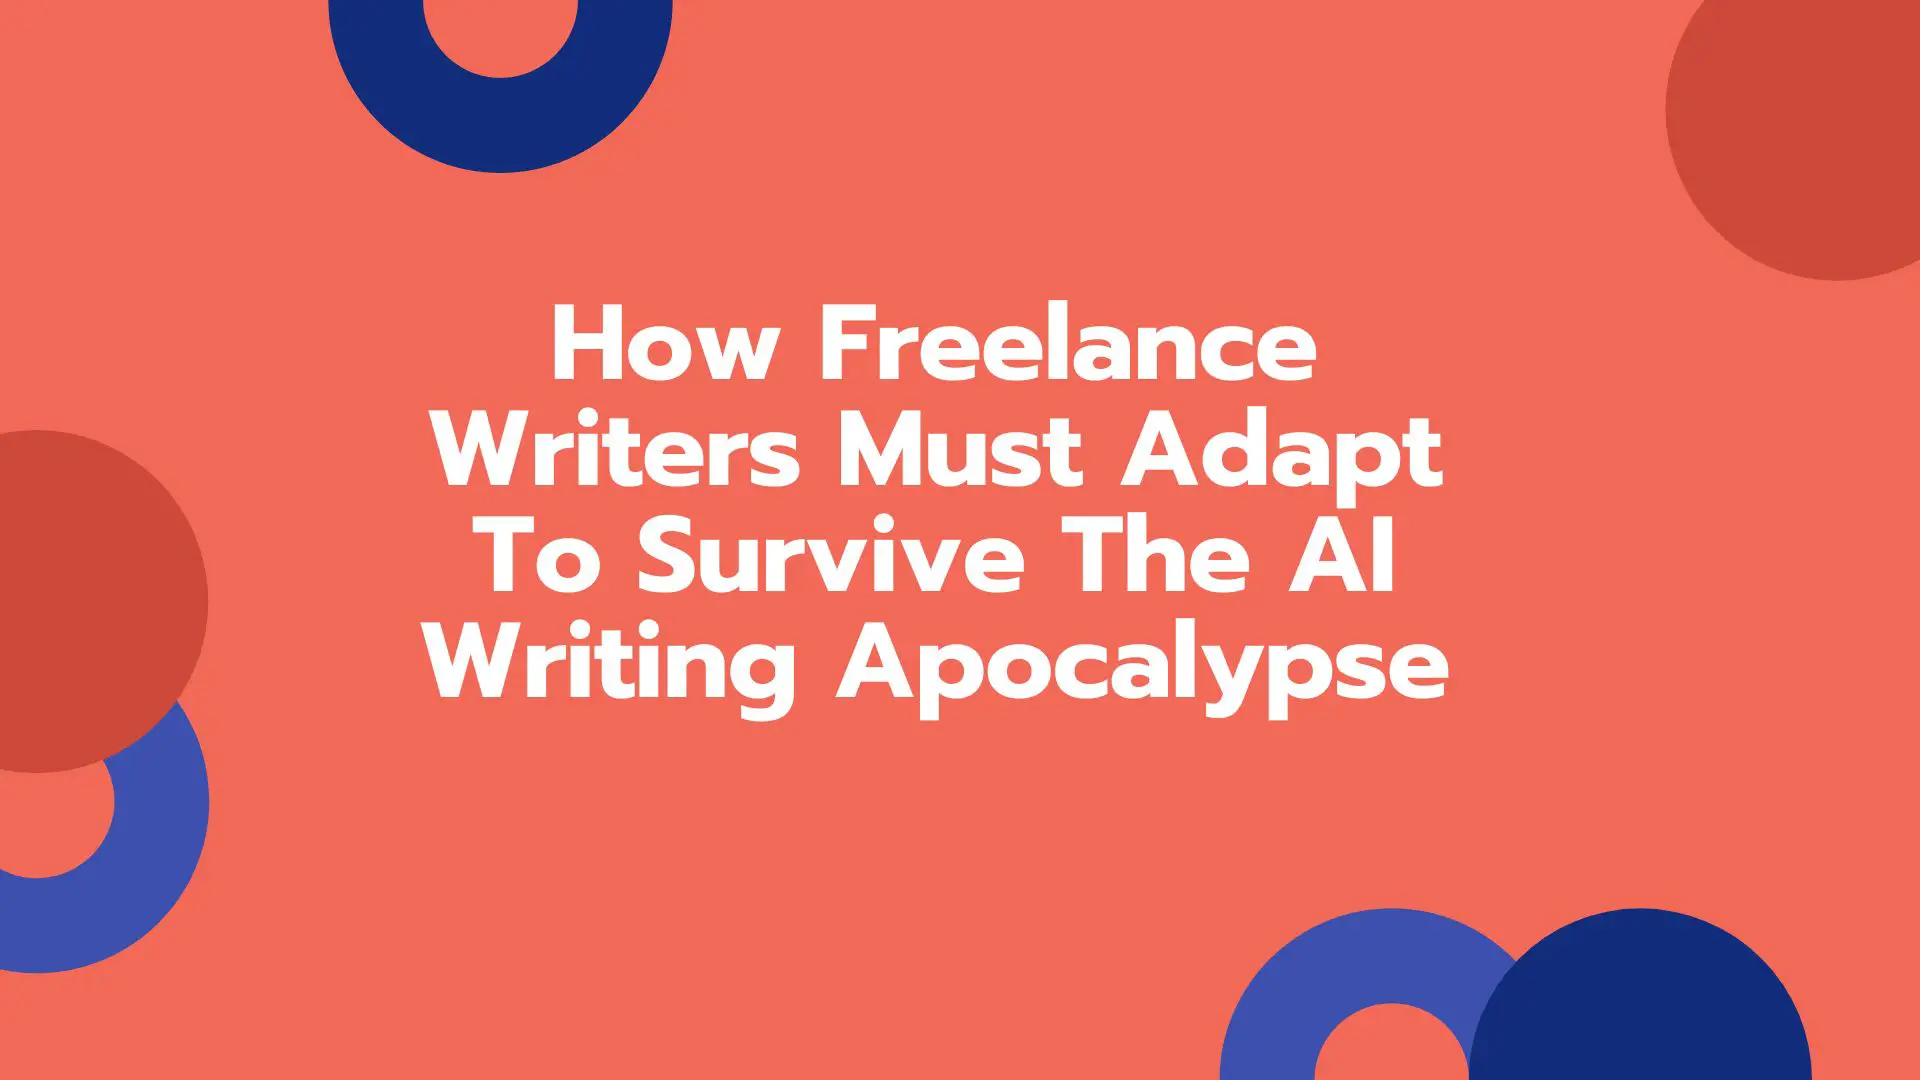 How Freelance Writers Must Adapt To Survive The AI Writing Apocalypse